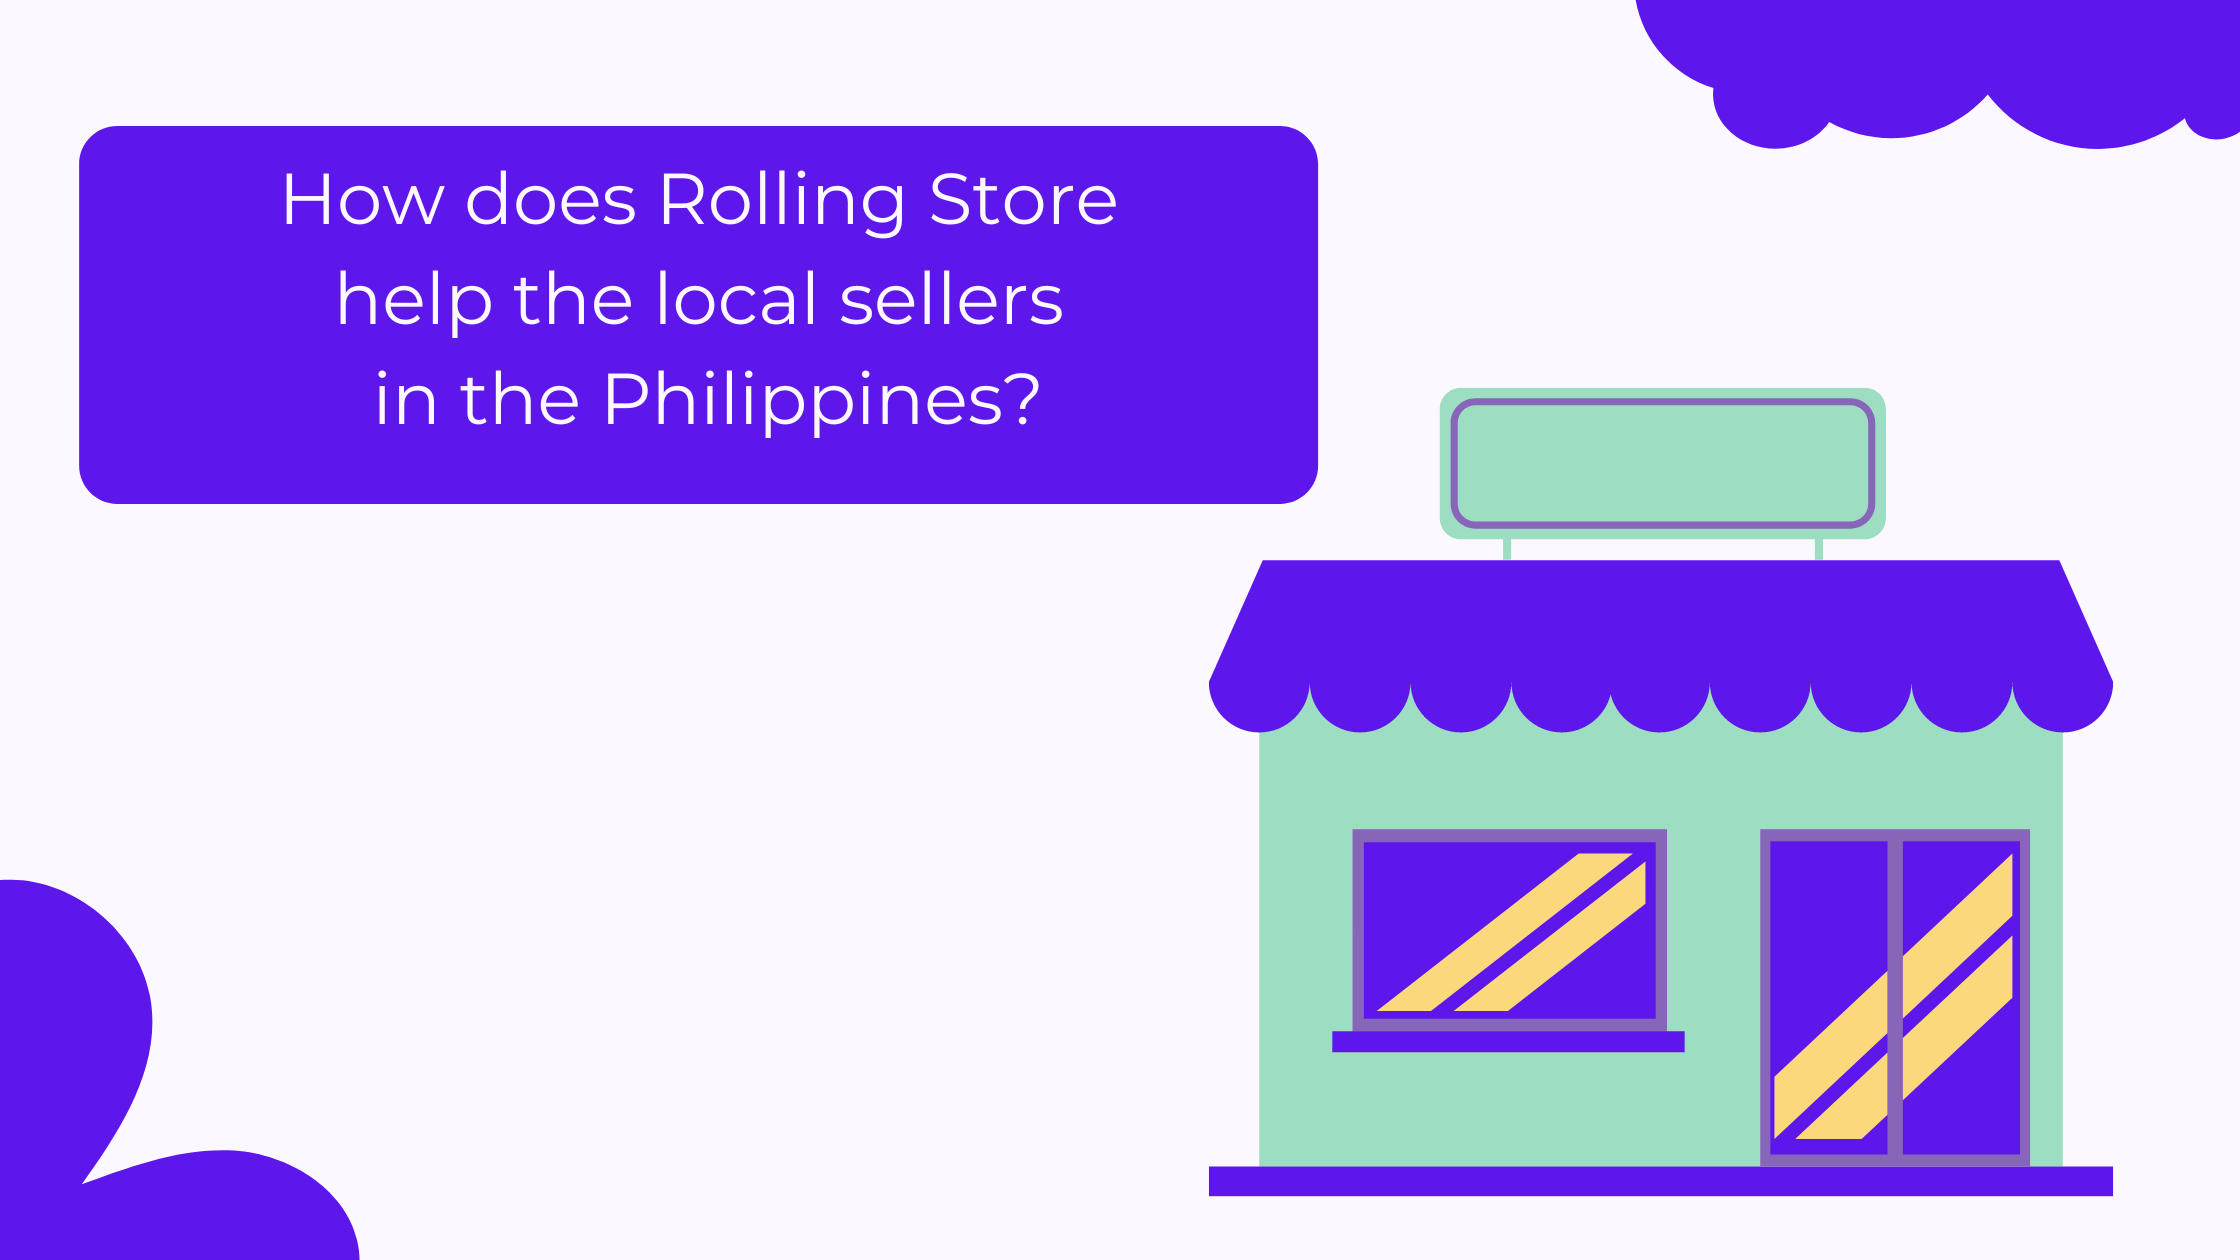 How does Rolling Store help the local sellers in the Philippines?